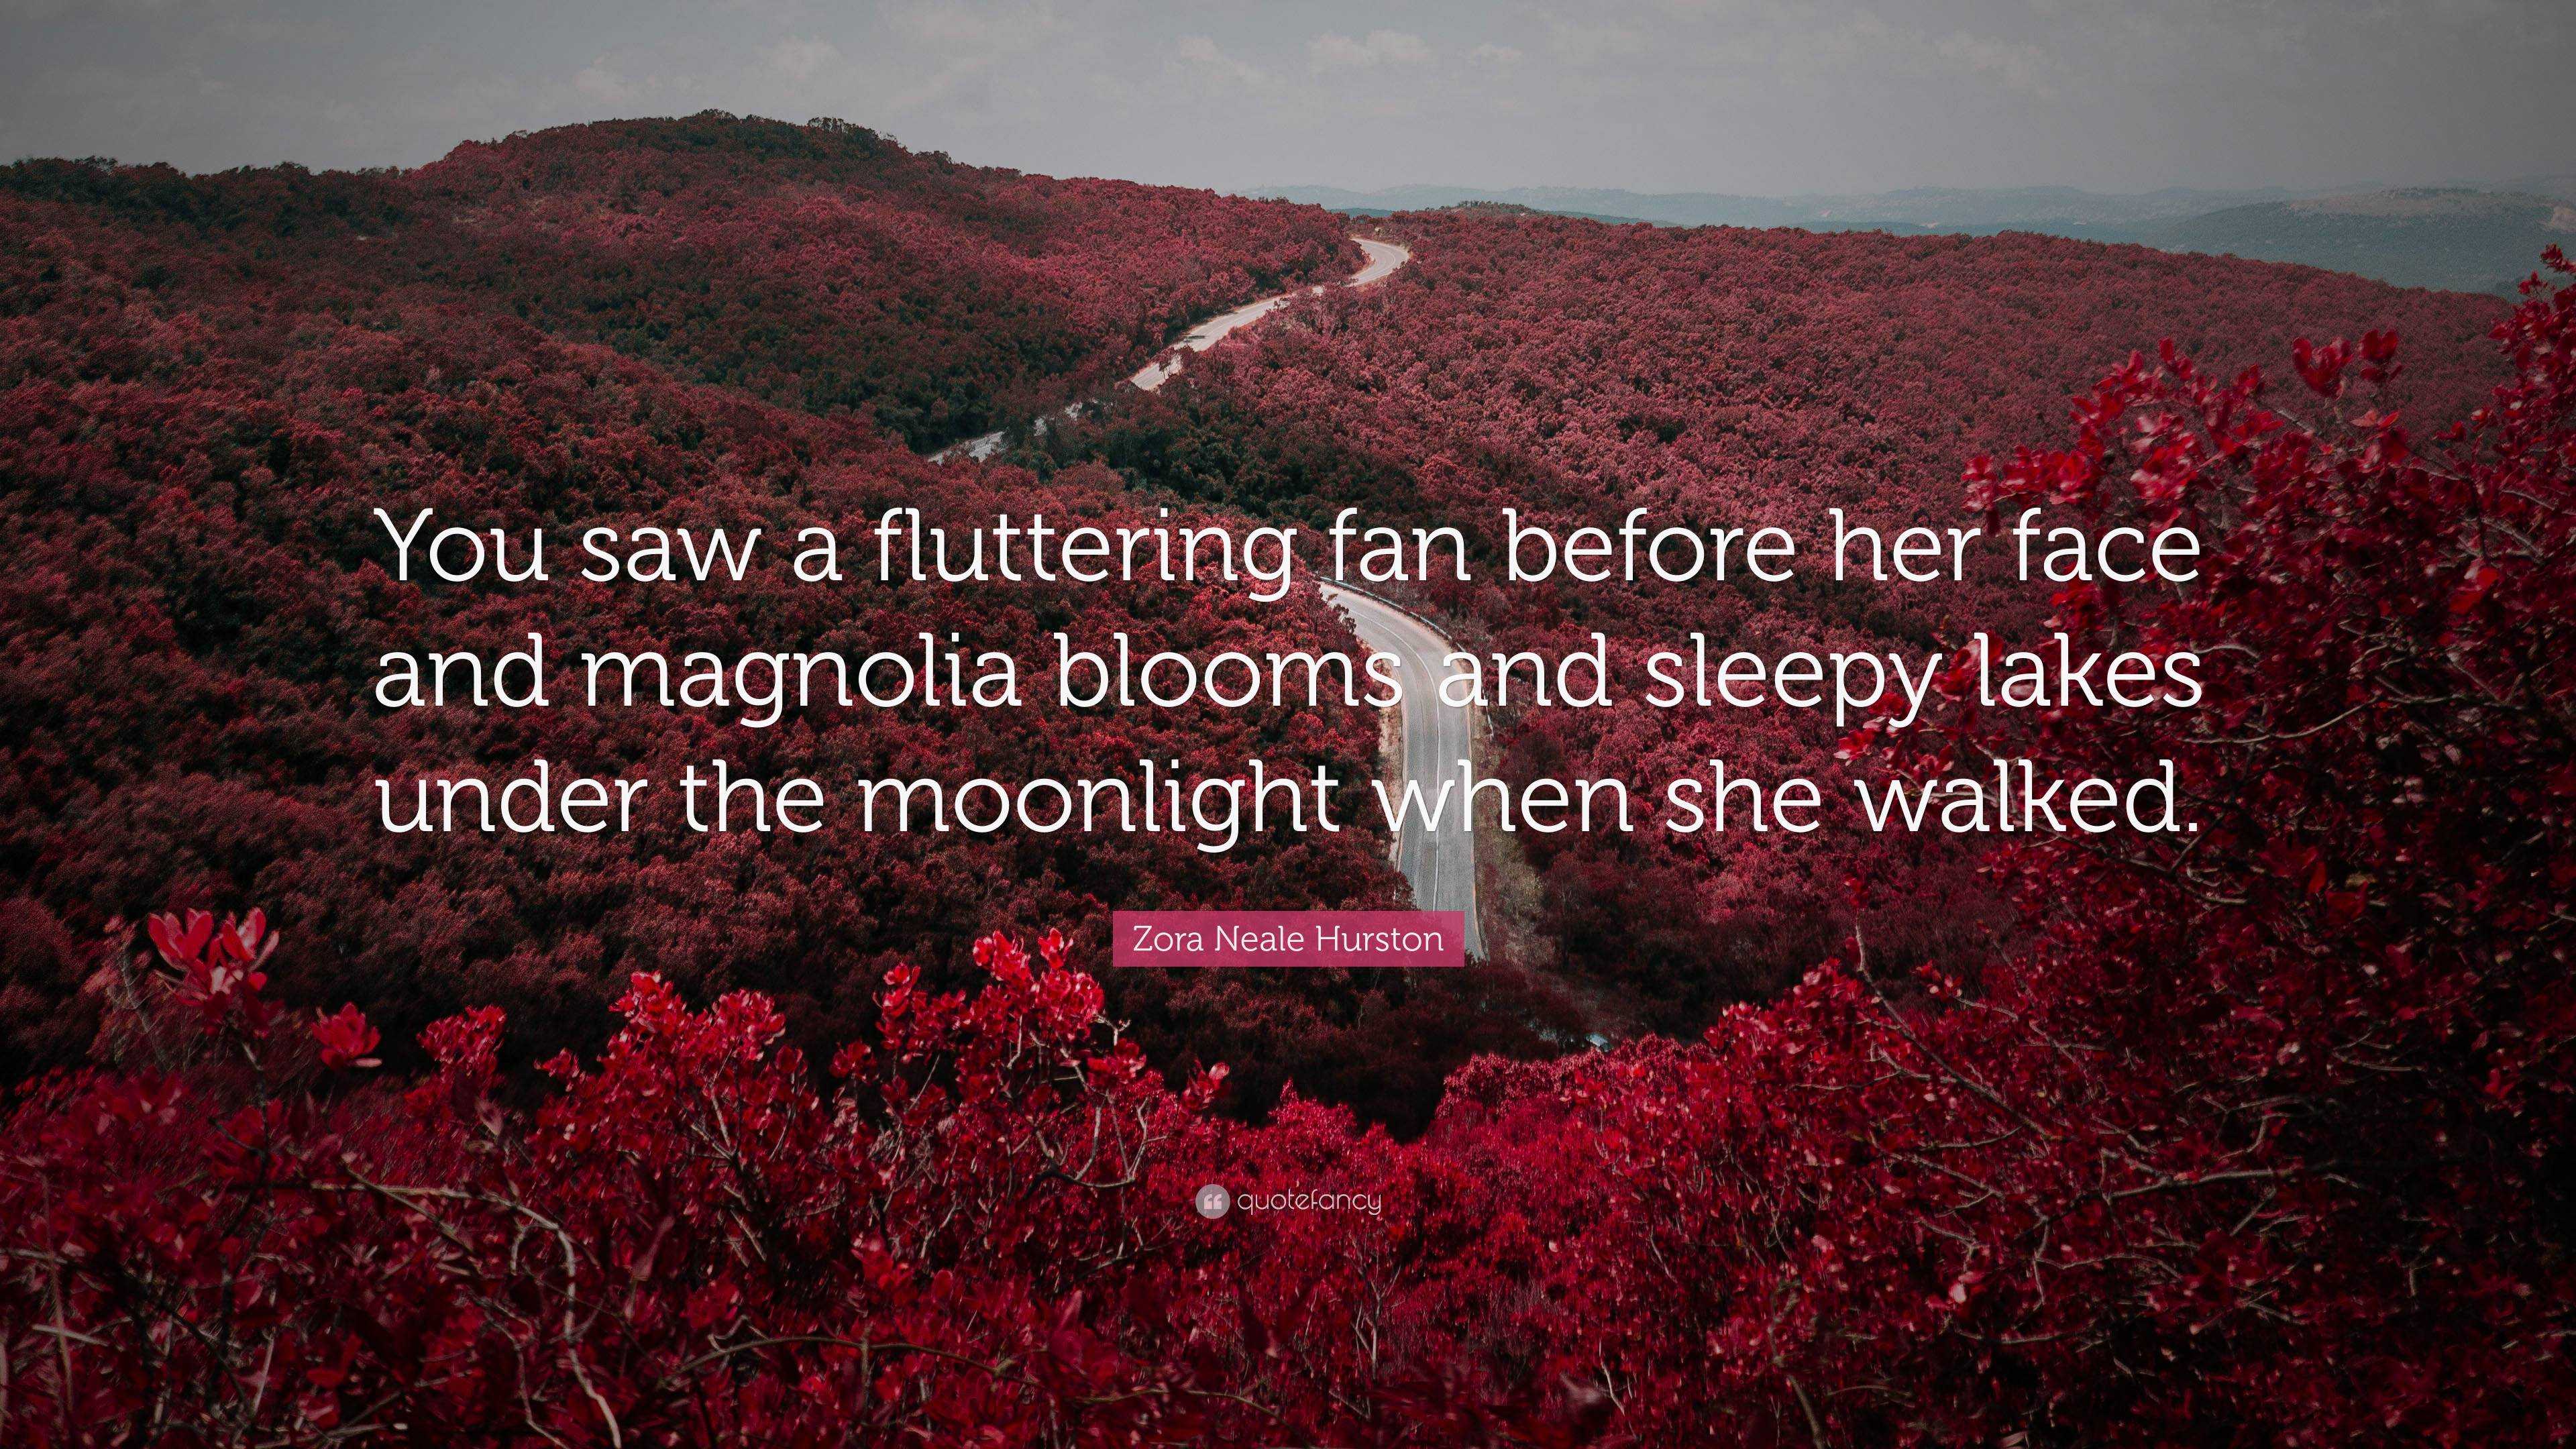 Zora Neale Hurston Quote You Saw A Fluttering Fan Before Her Face And Magnolia Blooms And